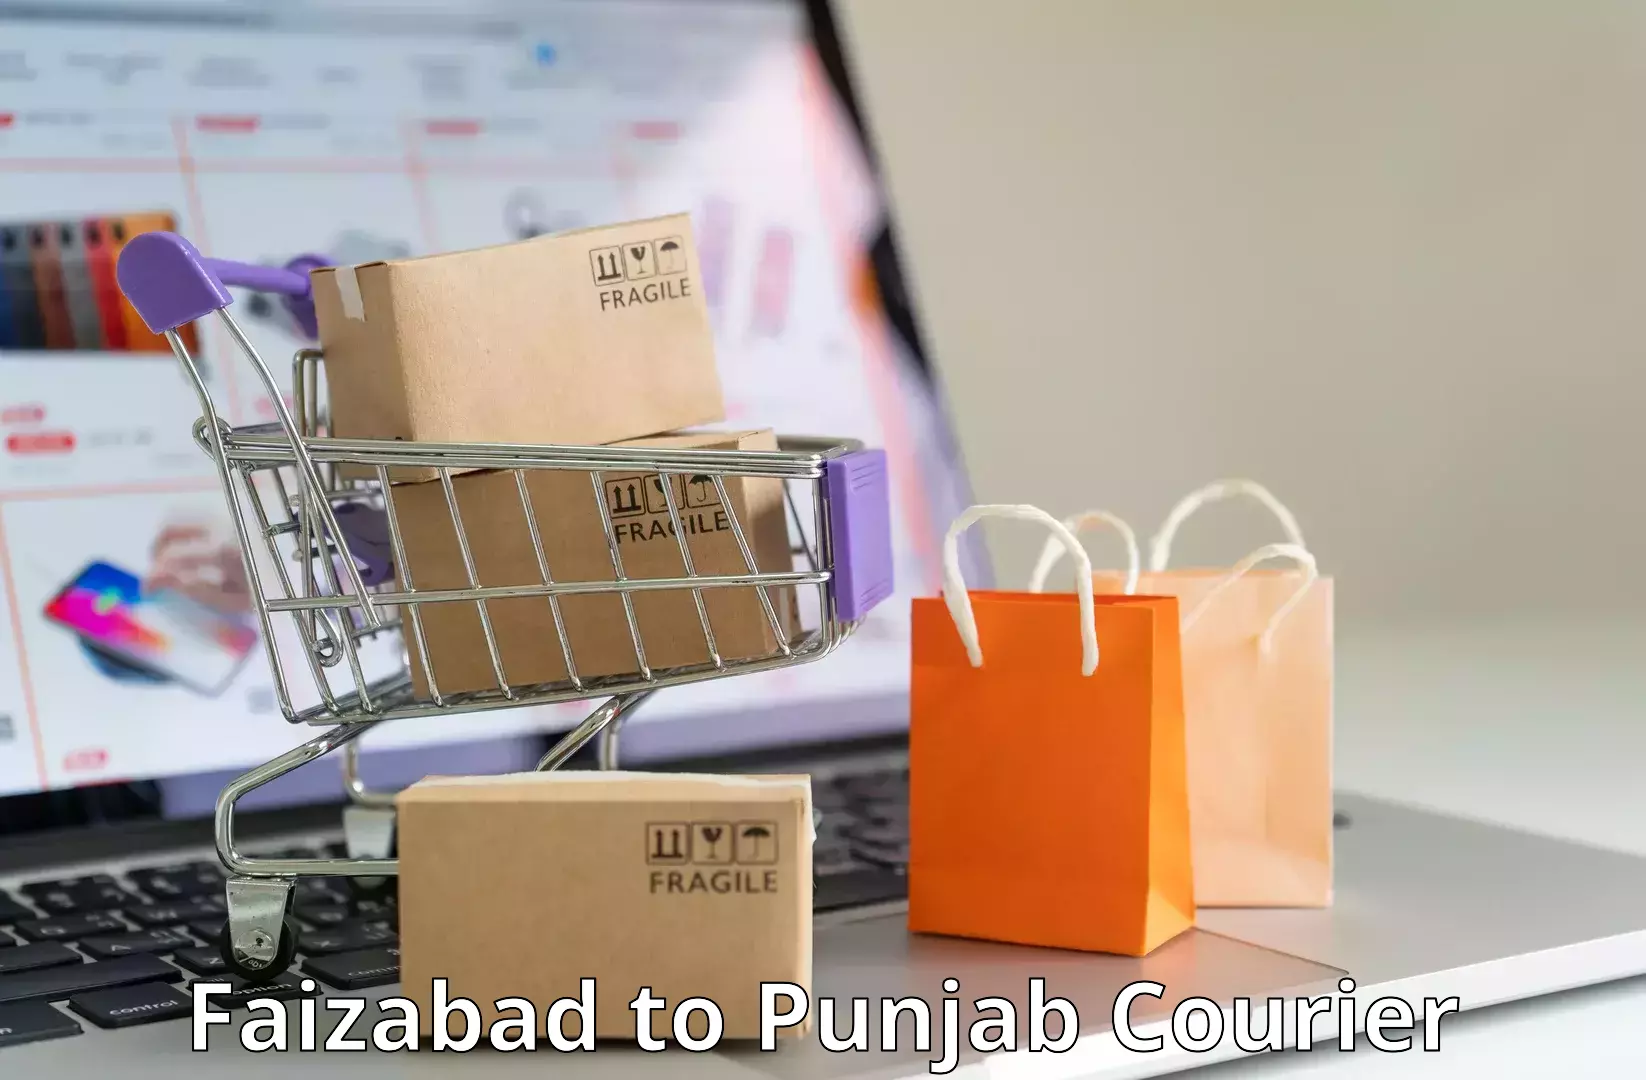 Medical delivery services Faizabad to Ludhiana